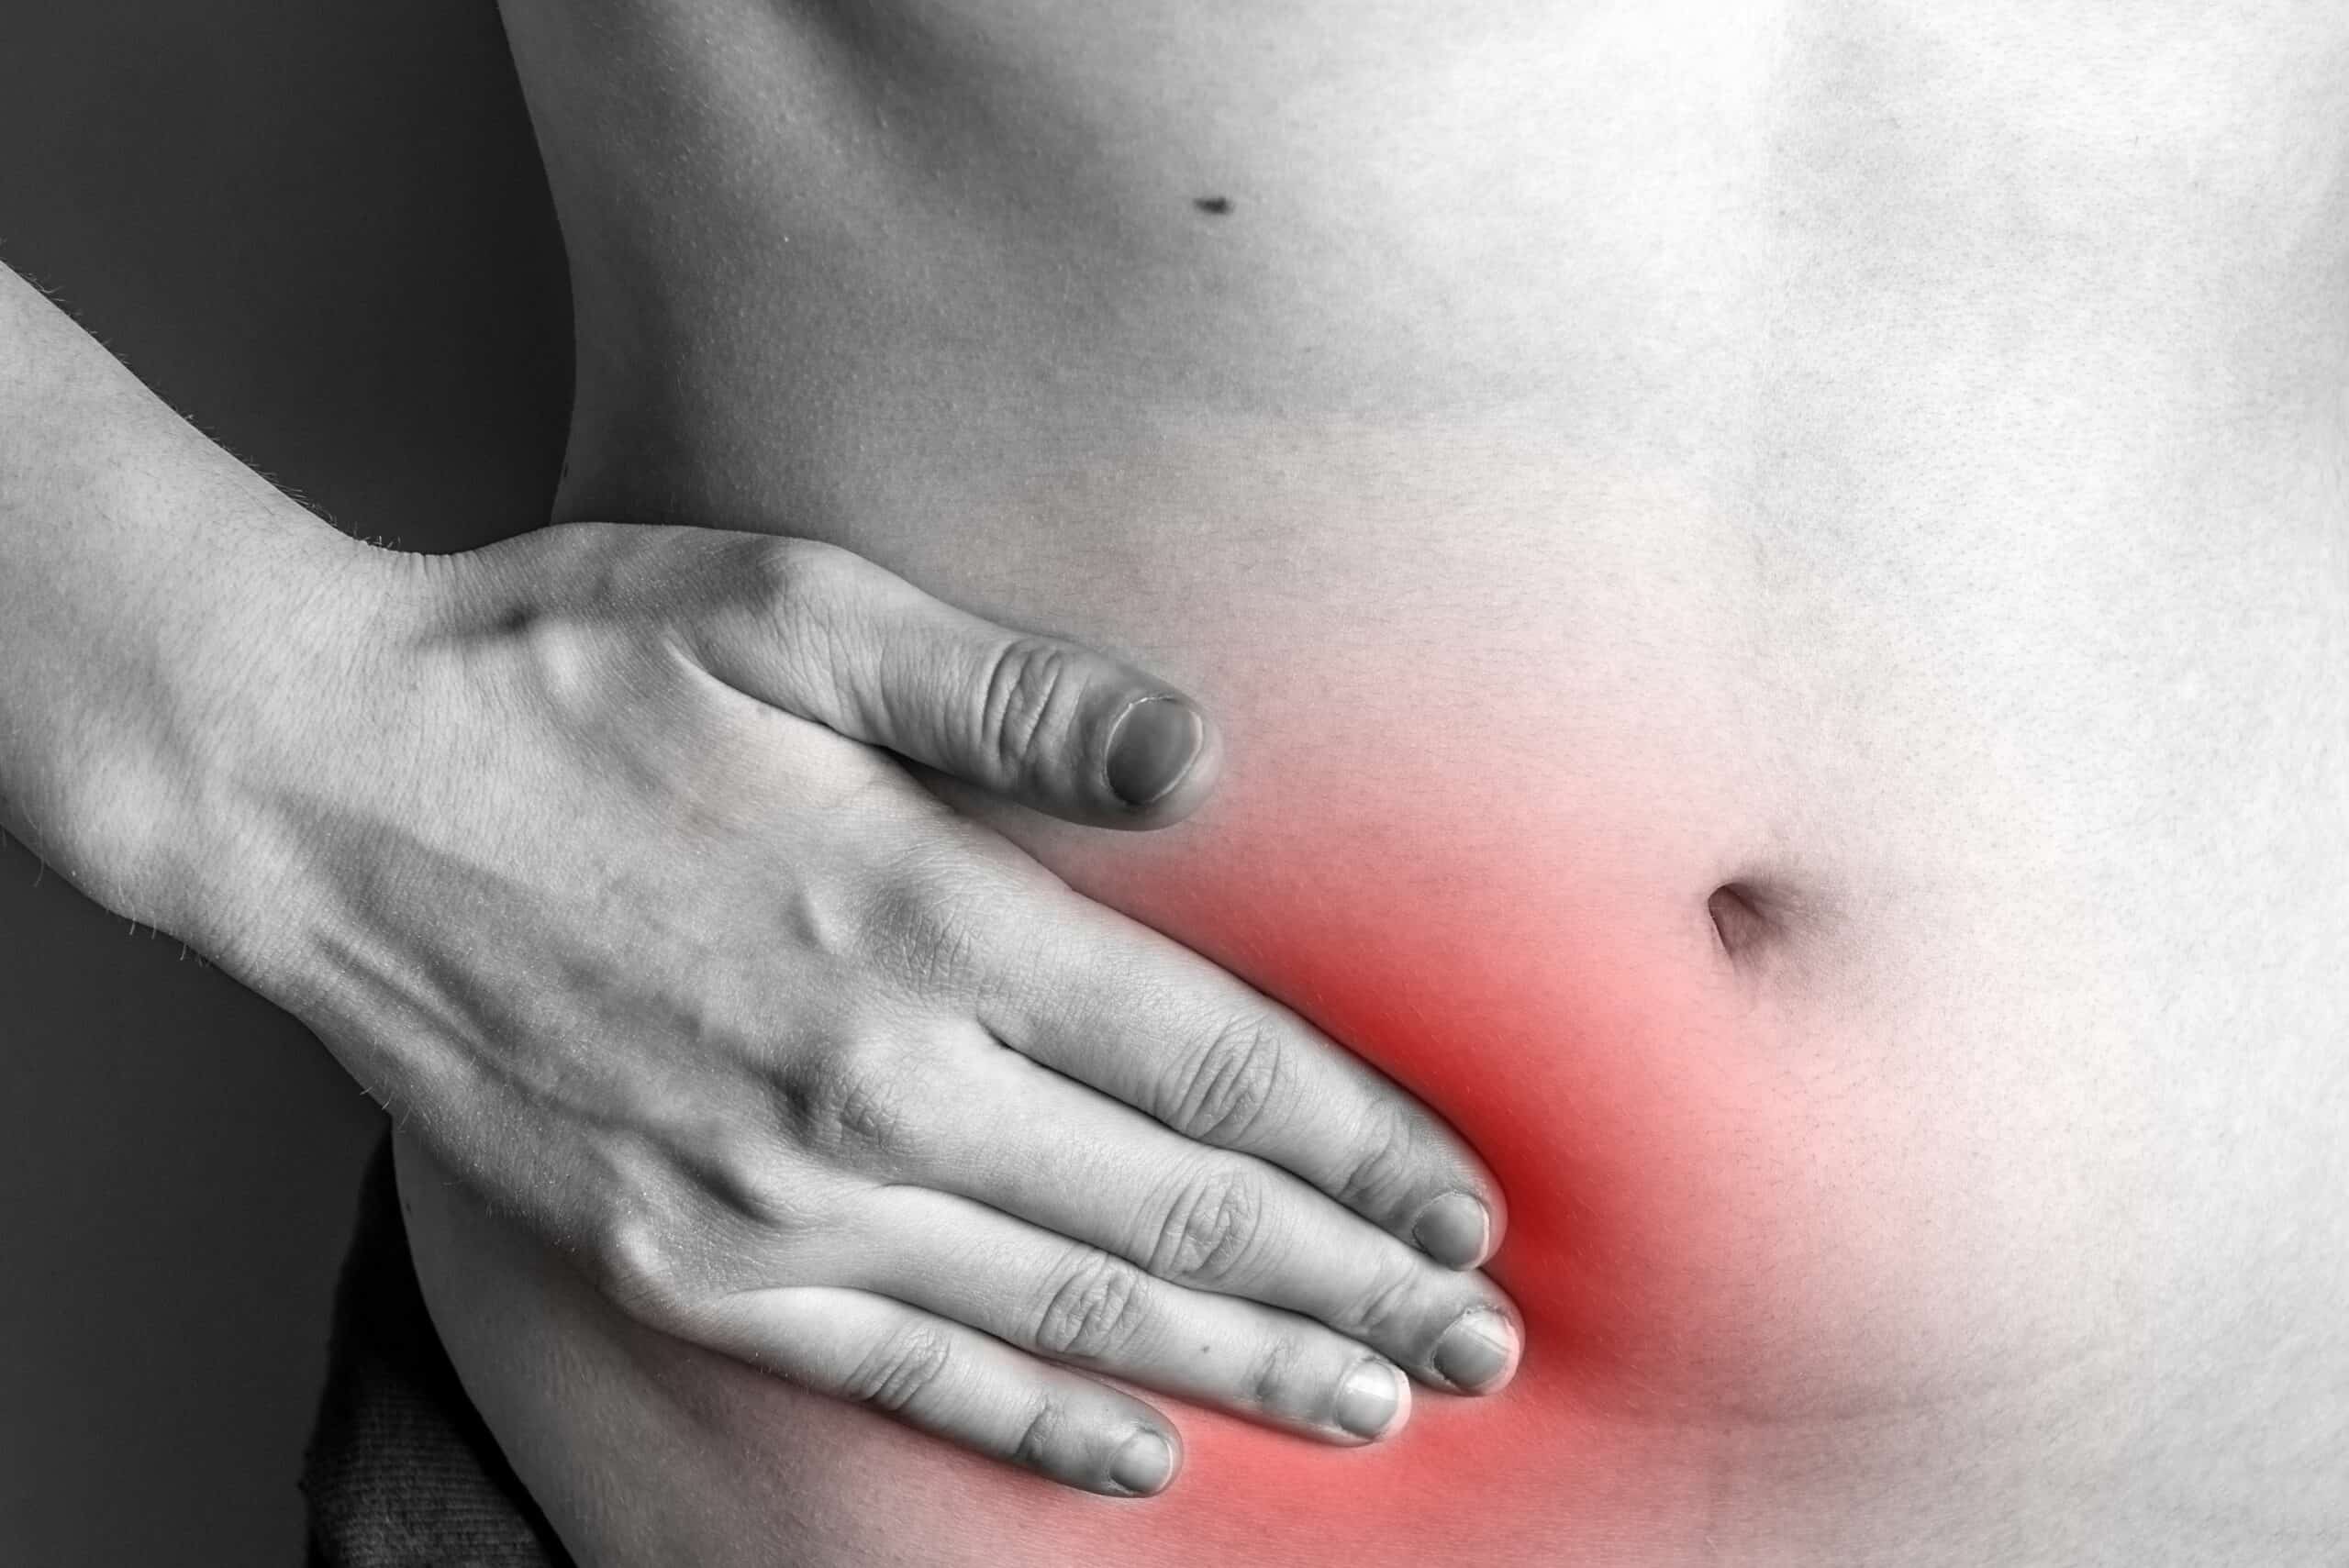 What causes an abdominal hernia, and how should it be treated?